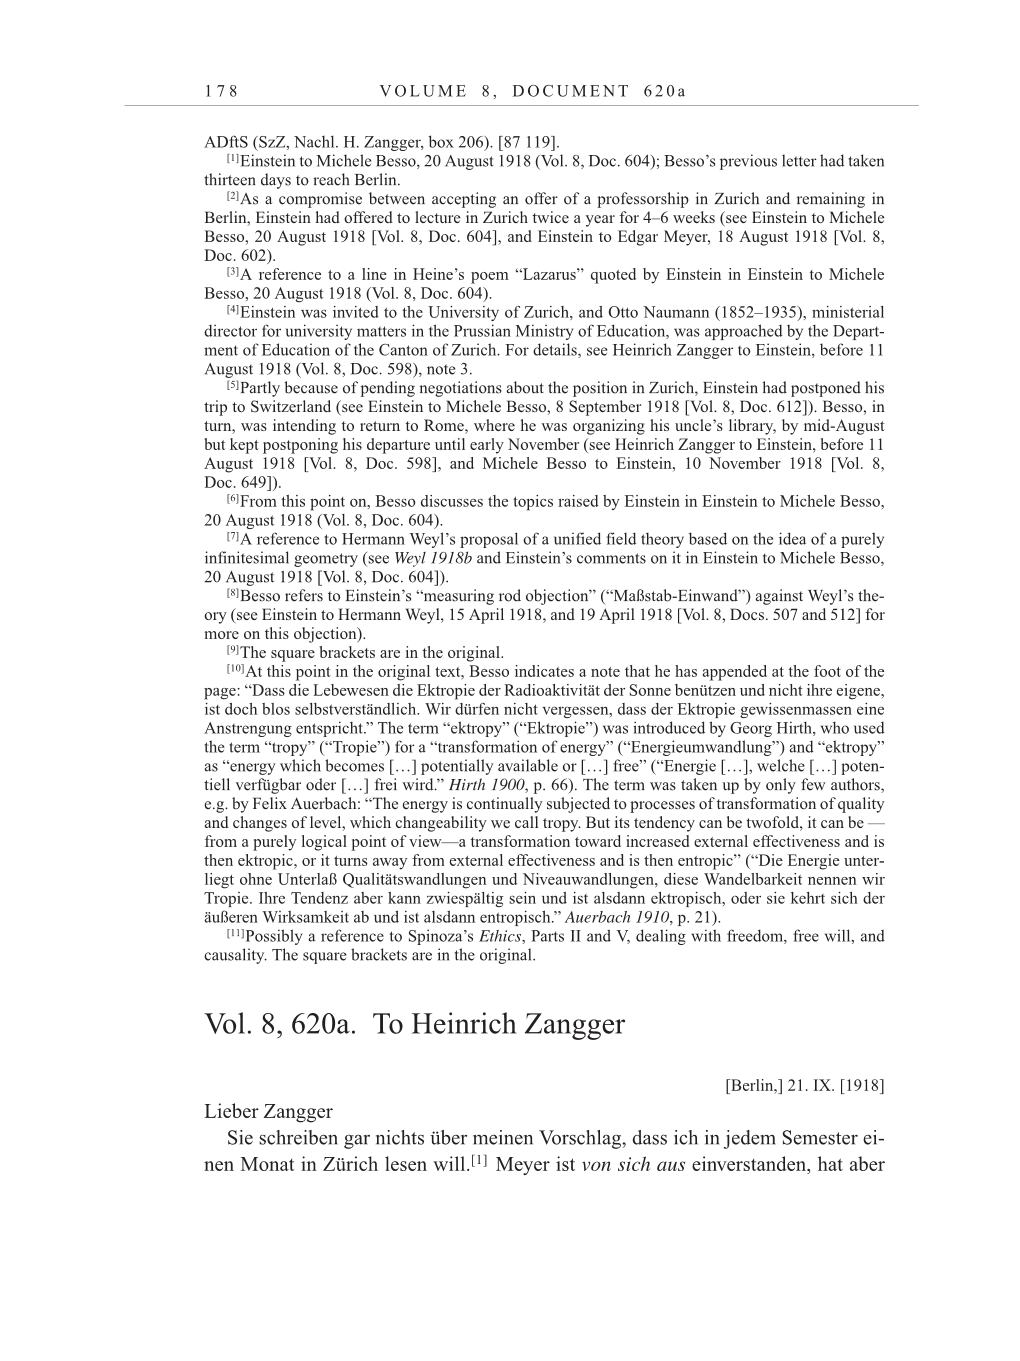 Volume 10: The Berlin Years: Correspondence May-December 1920 / Supplementary Correspondence 1909-1920 page 178